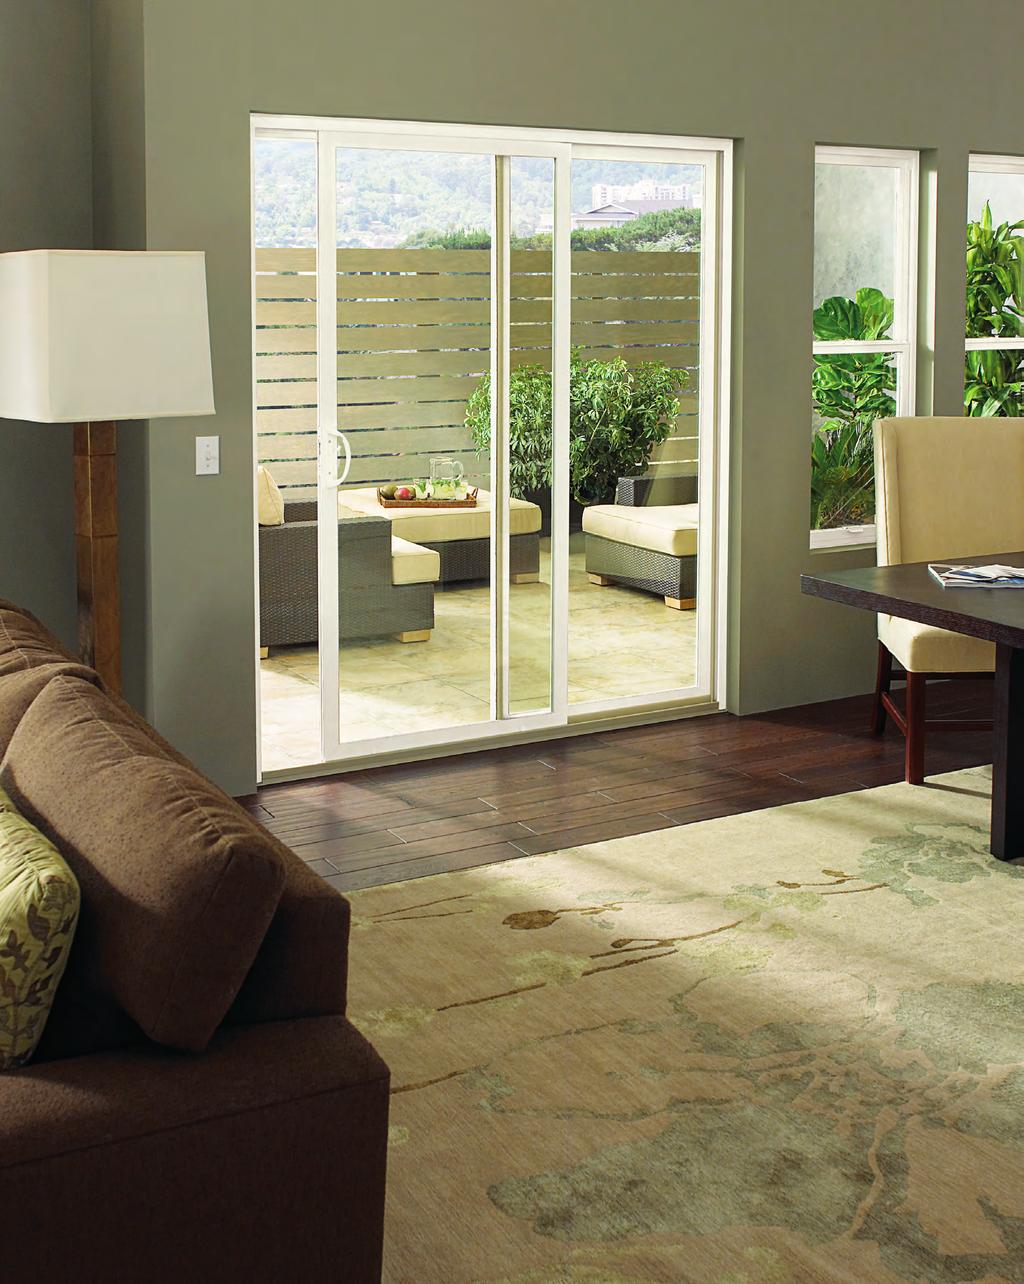 ALL ULTREX SLIDING PATIO DOOR KEY BENEFITS Ultrex fiberglass construction stays square and true 2 and 3 panel configurations up to 8' tall Available in special